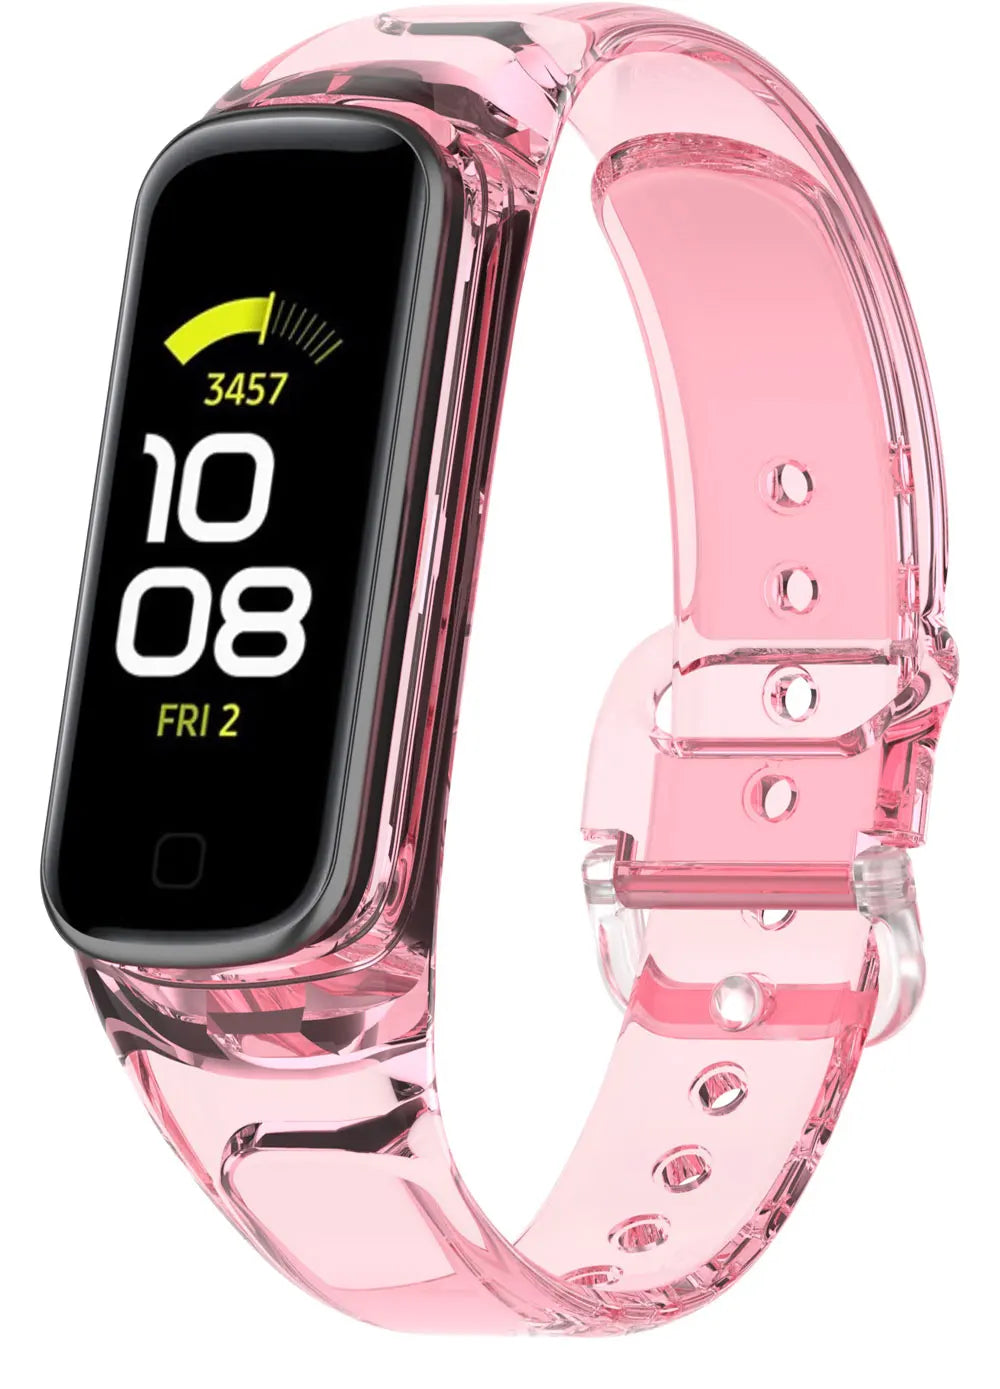 Transparent TPU Band For Samsung Galaxy Fit 2 SM-R220 Strap Discoloration In Light Bracelet For Galaxy Fit 2 SM-R220 Watchband